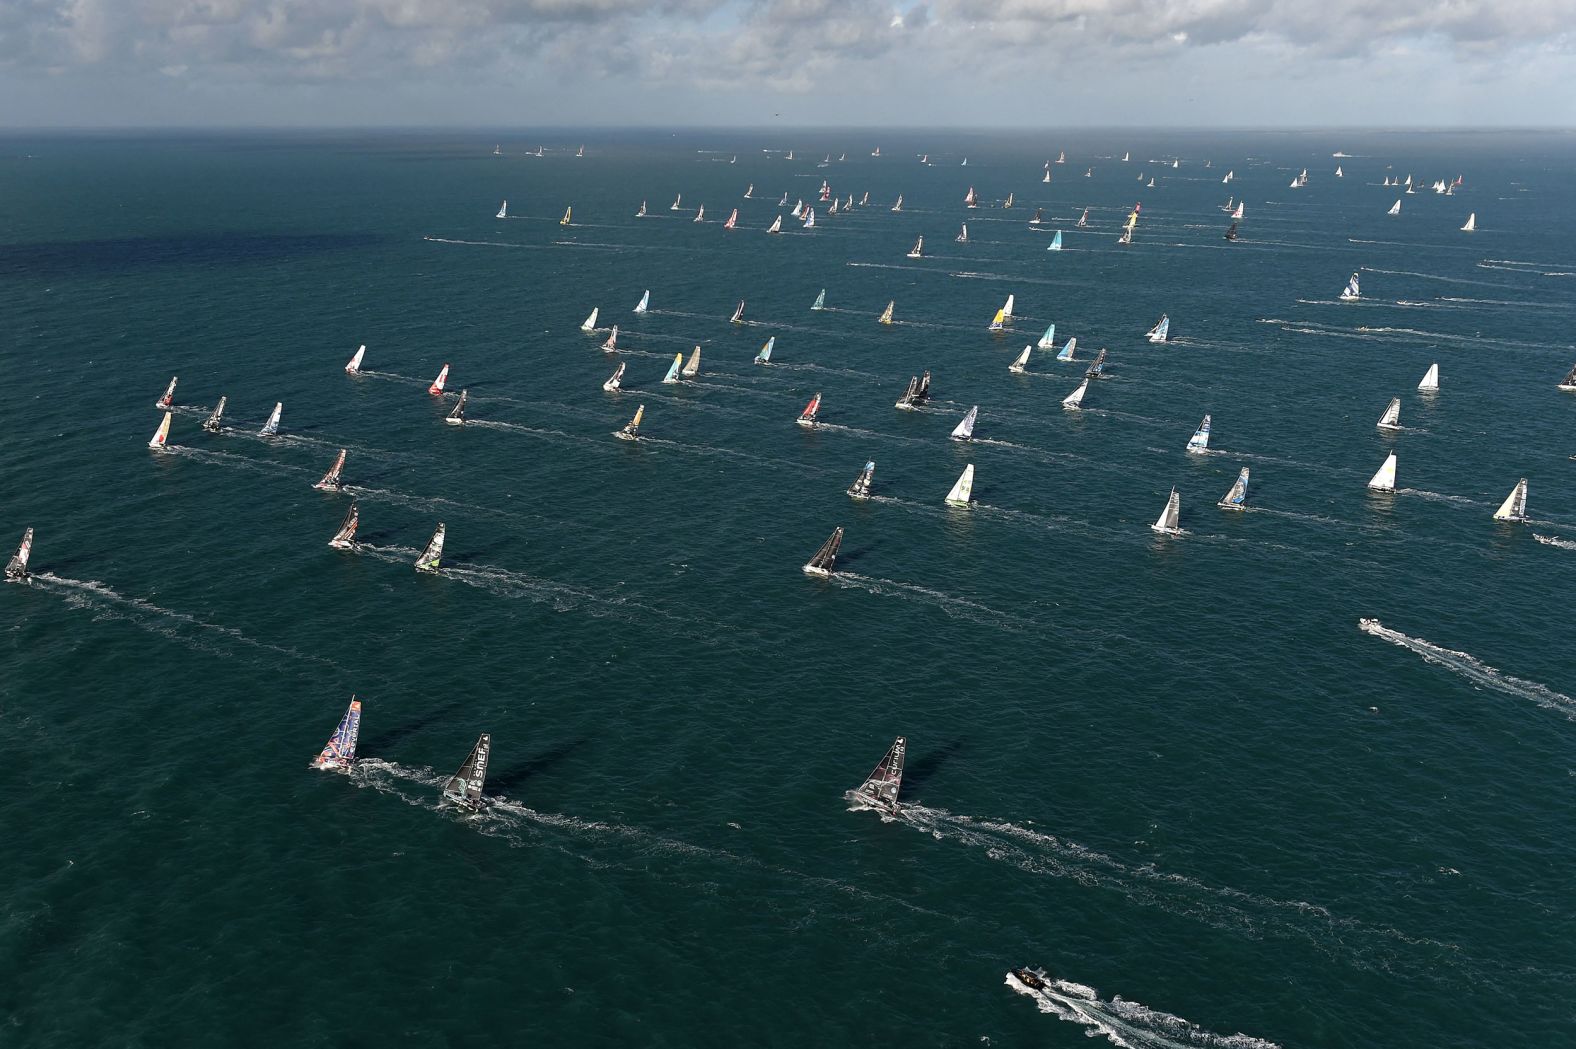 Skippers start the Route du Rhum sailing race off the coast of Saint-Malo, France, on Wednesday, November 9.